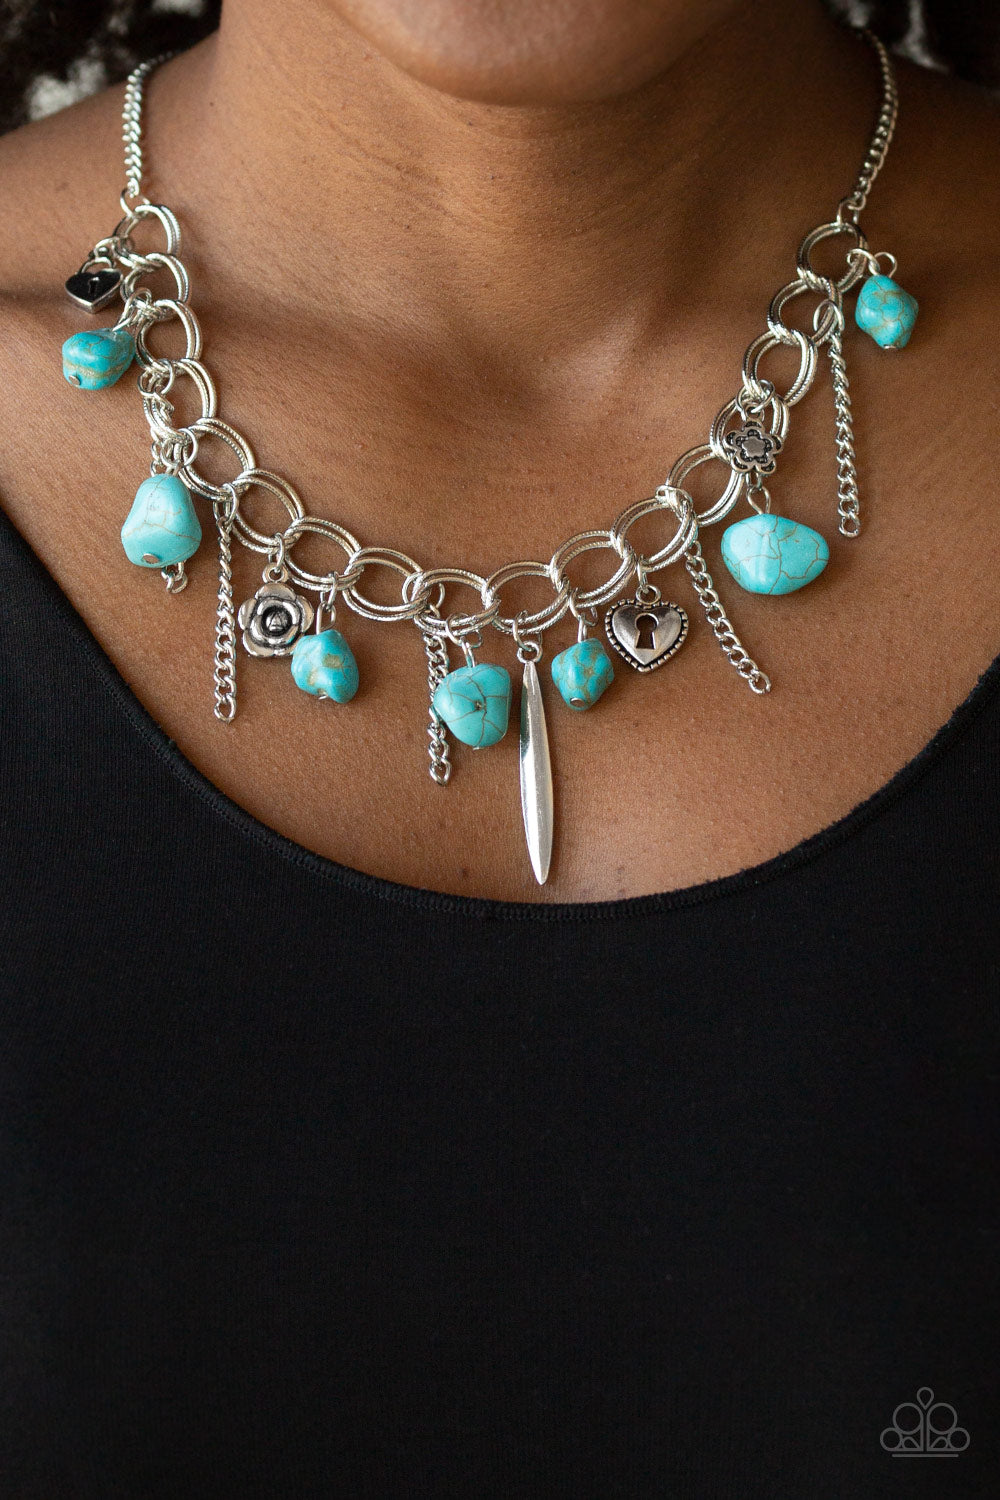 Paparazzi Necklace ~ Southern Sweetheart - Blue Rock Beads and Silver Charms Necklace